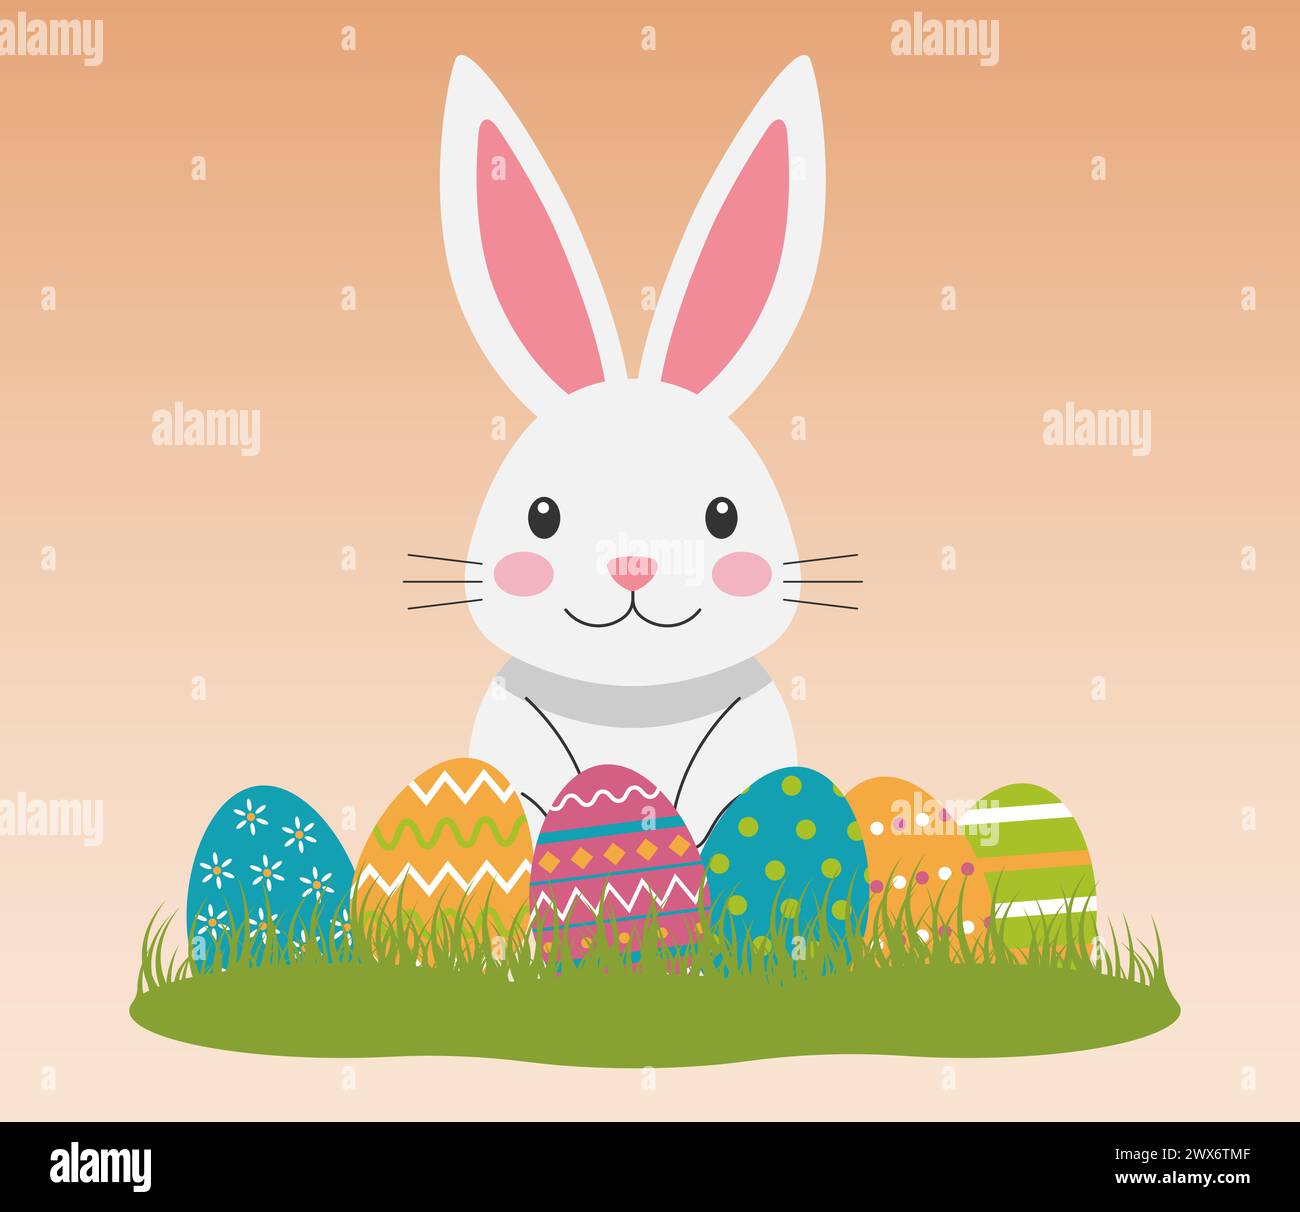 Illustration with a white Easter bunny sitting in green grass with painted eggs. Happy Easter vector background for greeting card, poster, banner. Stock Vector